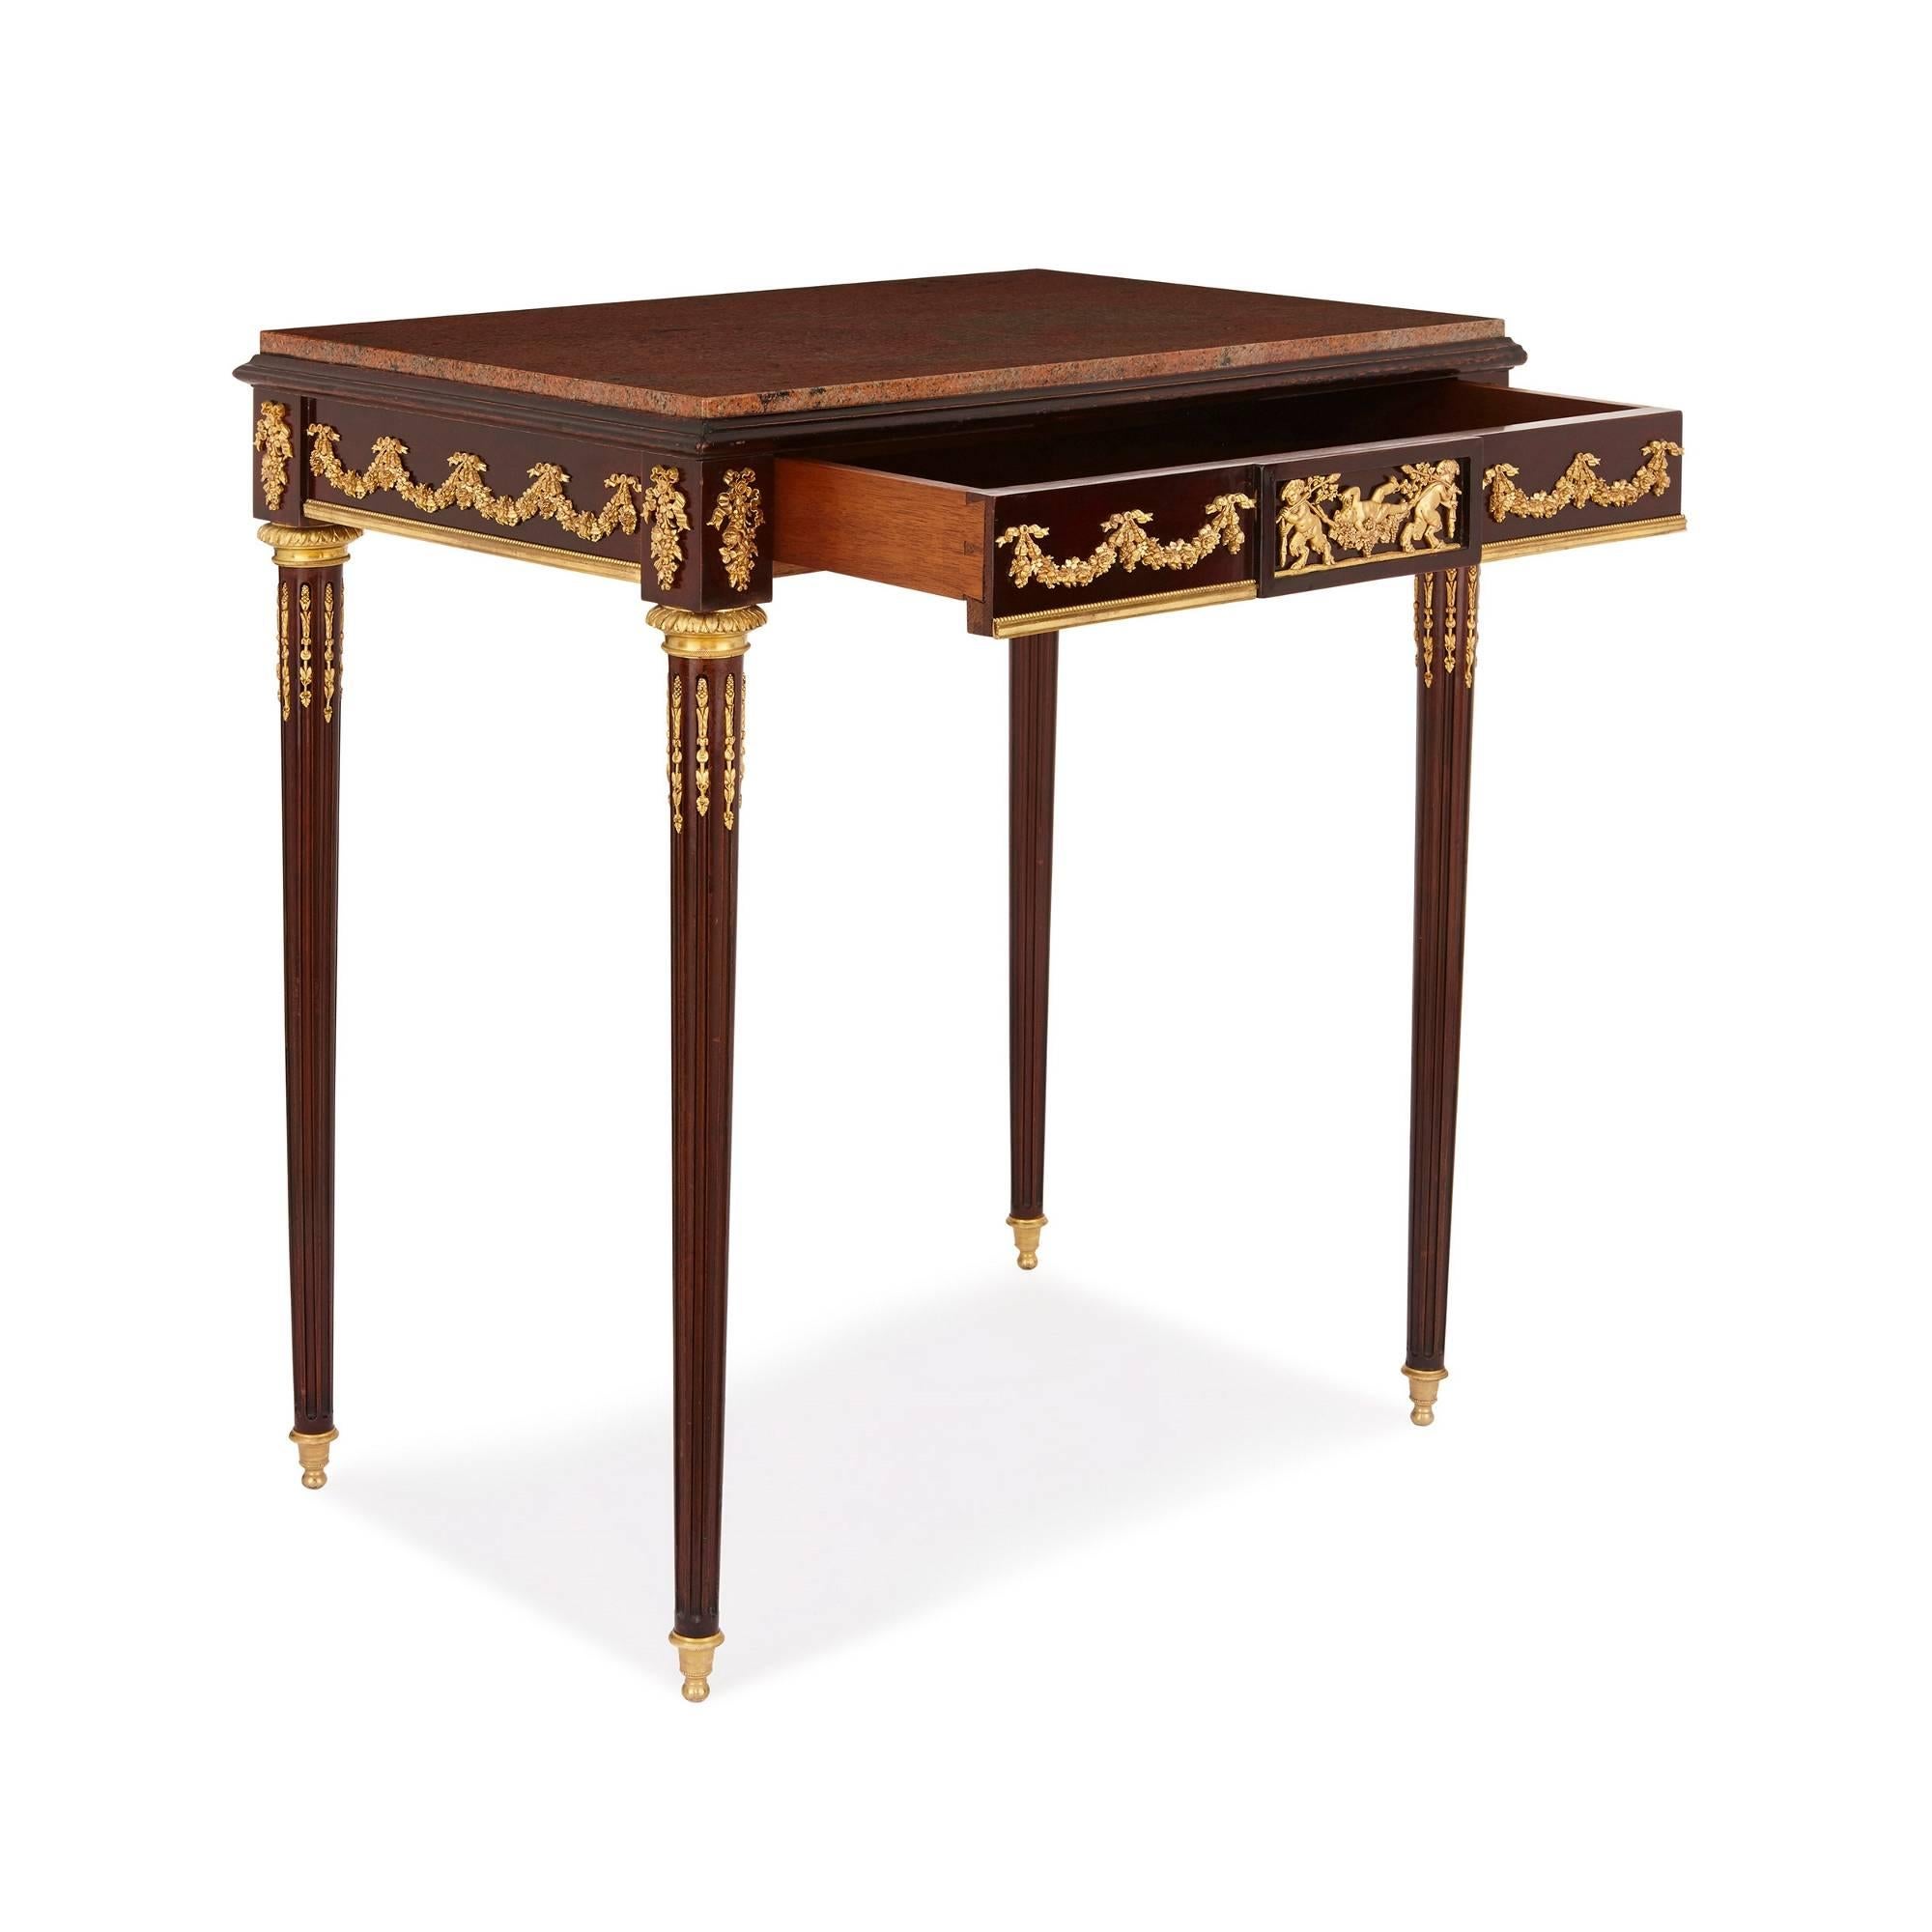 Neoclassical Antique French Gilt Bronze-Mounted Mahogany Side Table For Sale